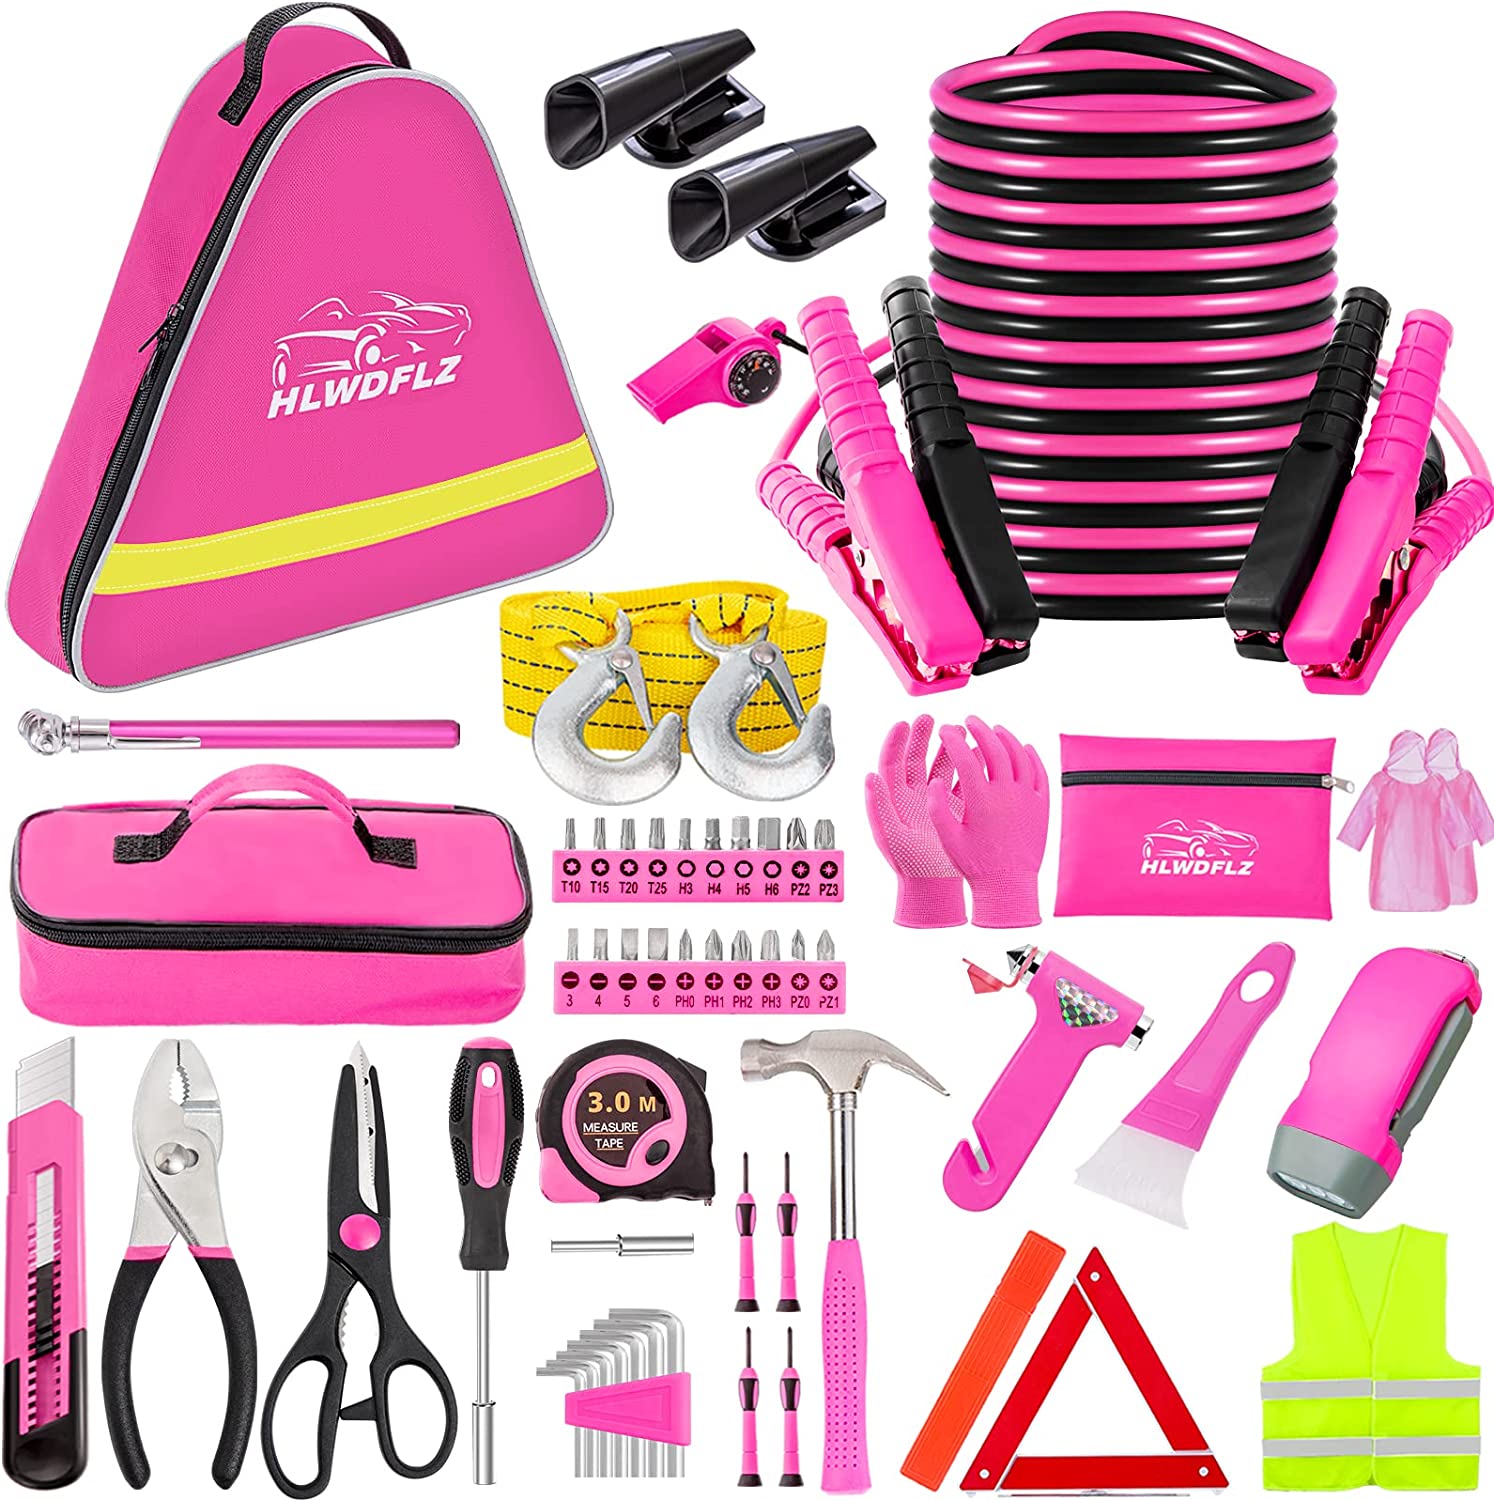 HLWDFLZ Car Emergency Kit – Pink Roadside Assistance Emergency Kit with Jumper Cables, Auto Repair Tool Set, Deer Whistles, Winter Car Safety Roadside Assist Kit for Teen Girl and Ladies